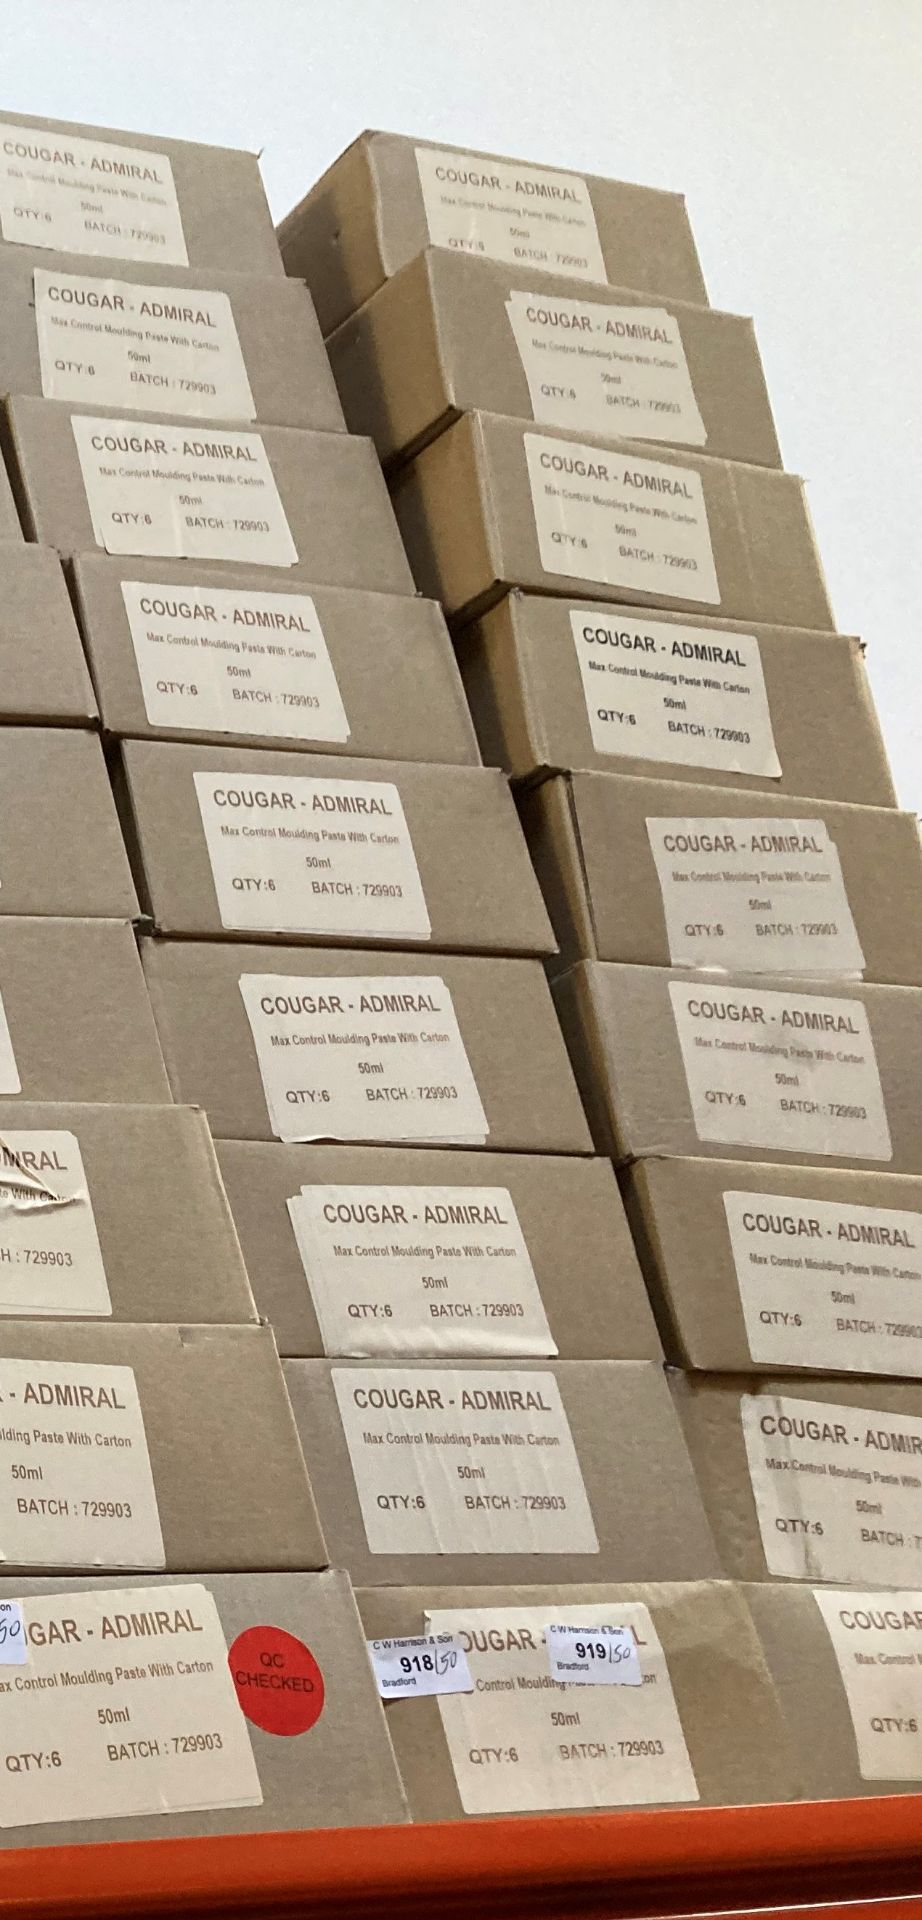 Fifty boxes of Cougar Admiral Max Control Hair Moulding Paste with Caton (6 units per box) - Image 2 of 2